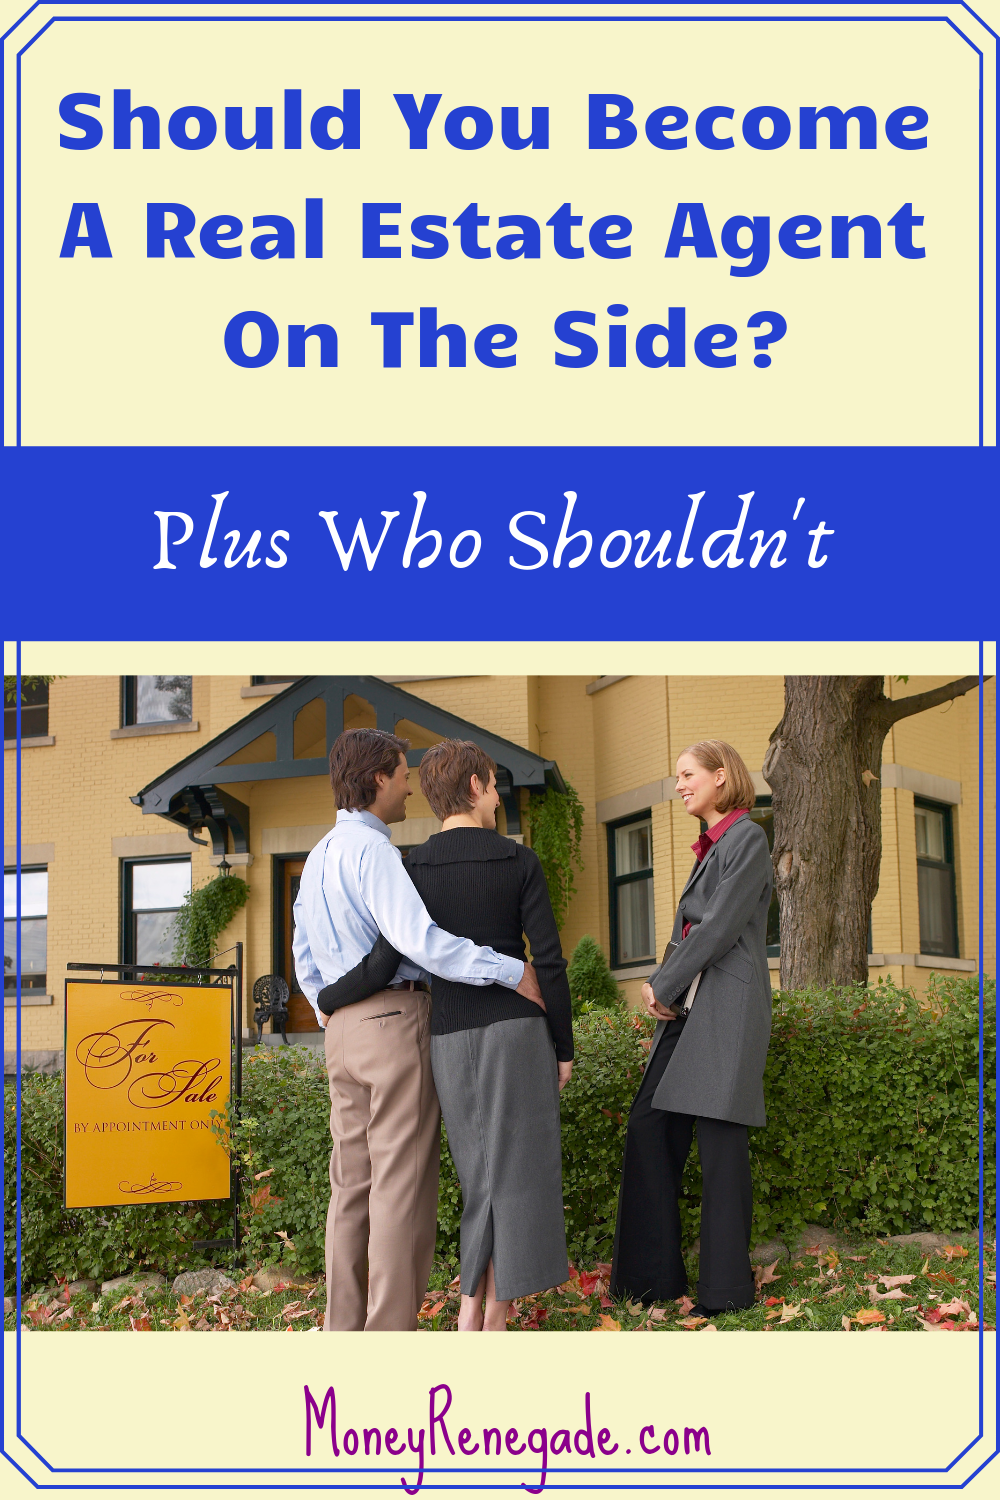 Should You Become A Real Estate Agent On The Side?